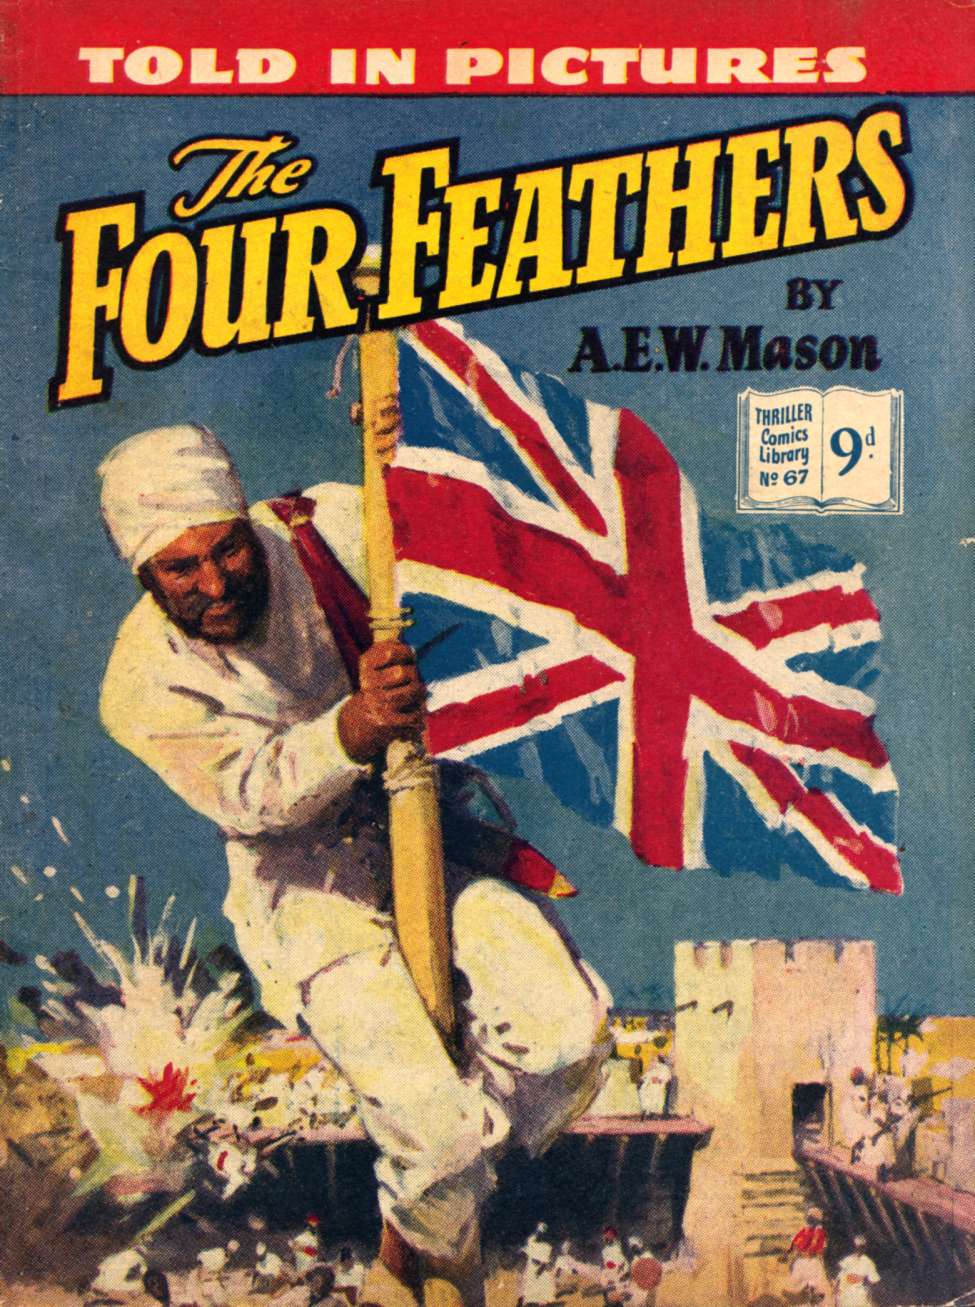 Book Cover For Thriller Comics Library 67 - The Four Feathers